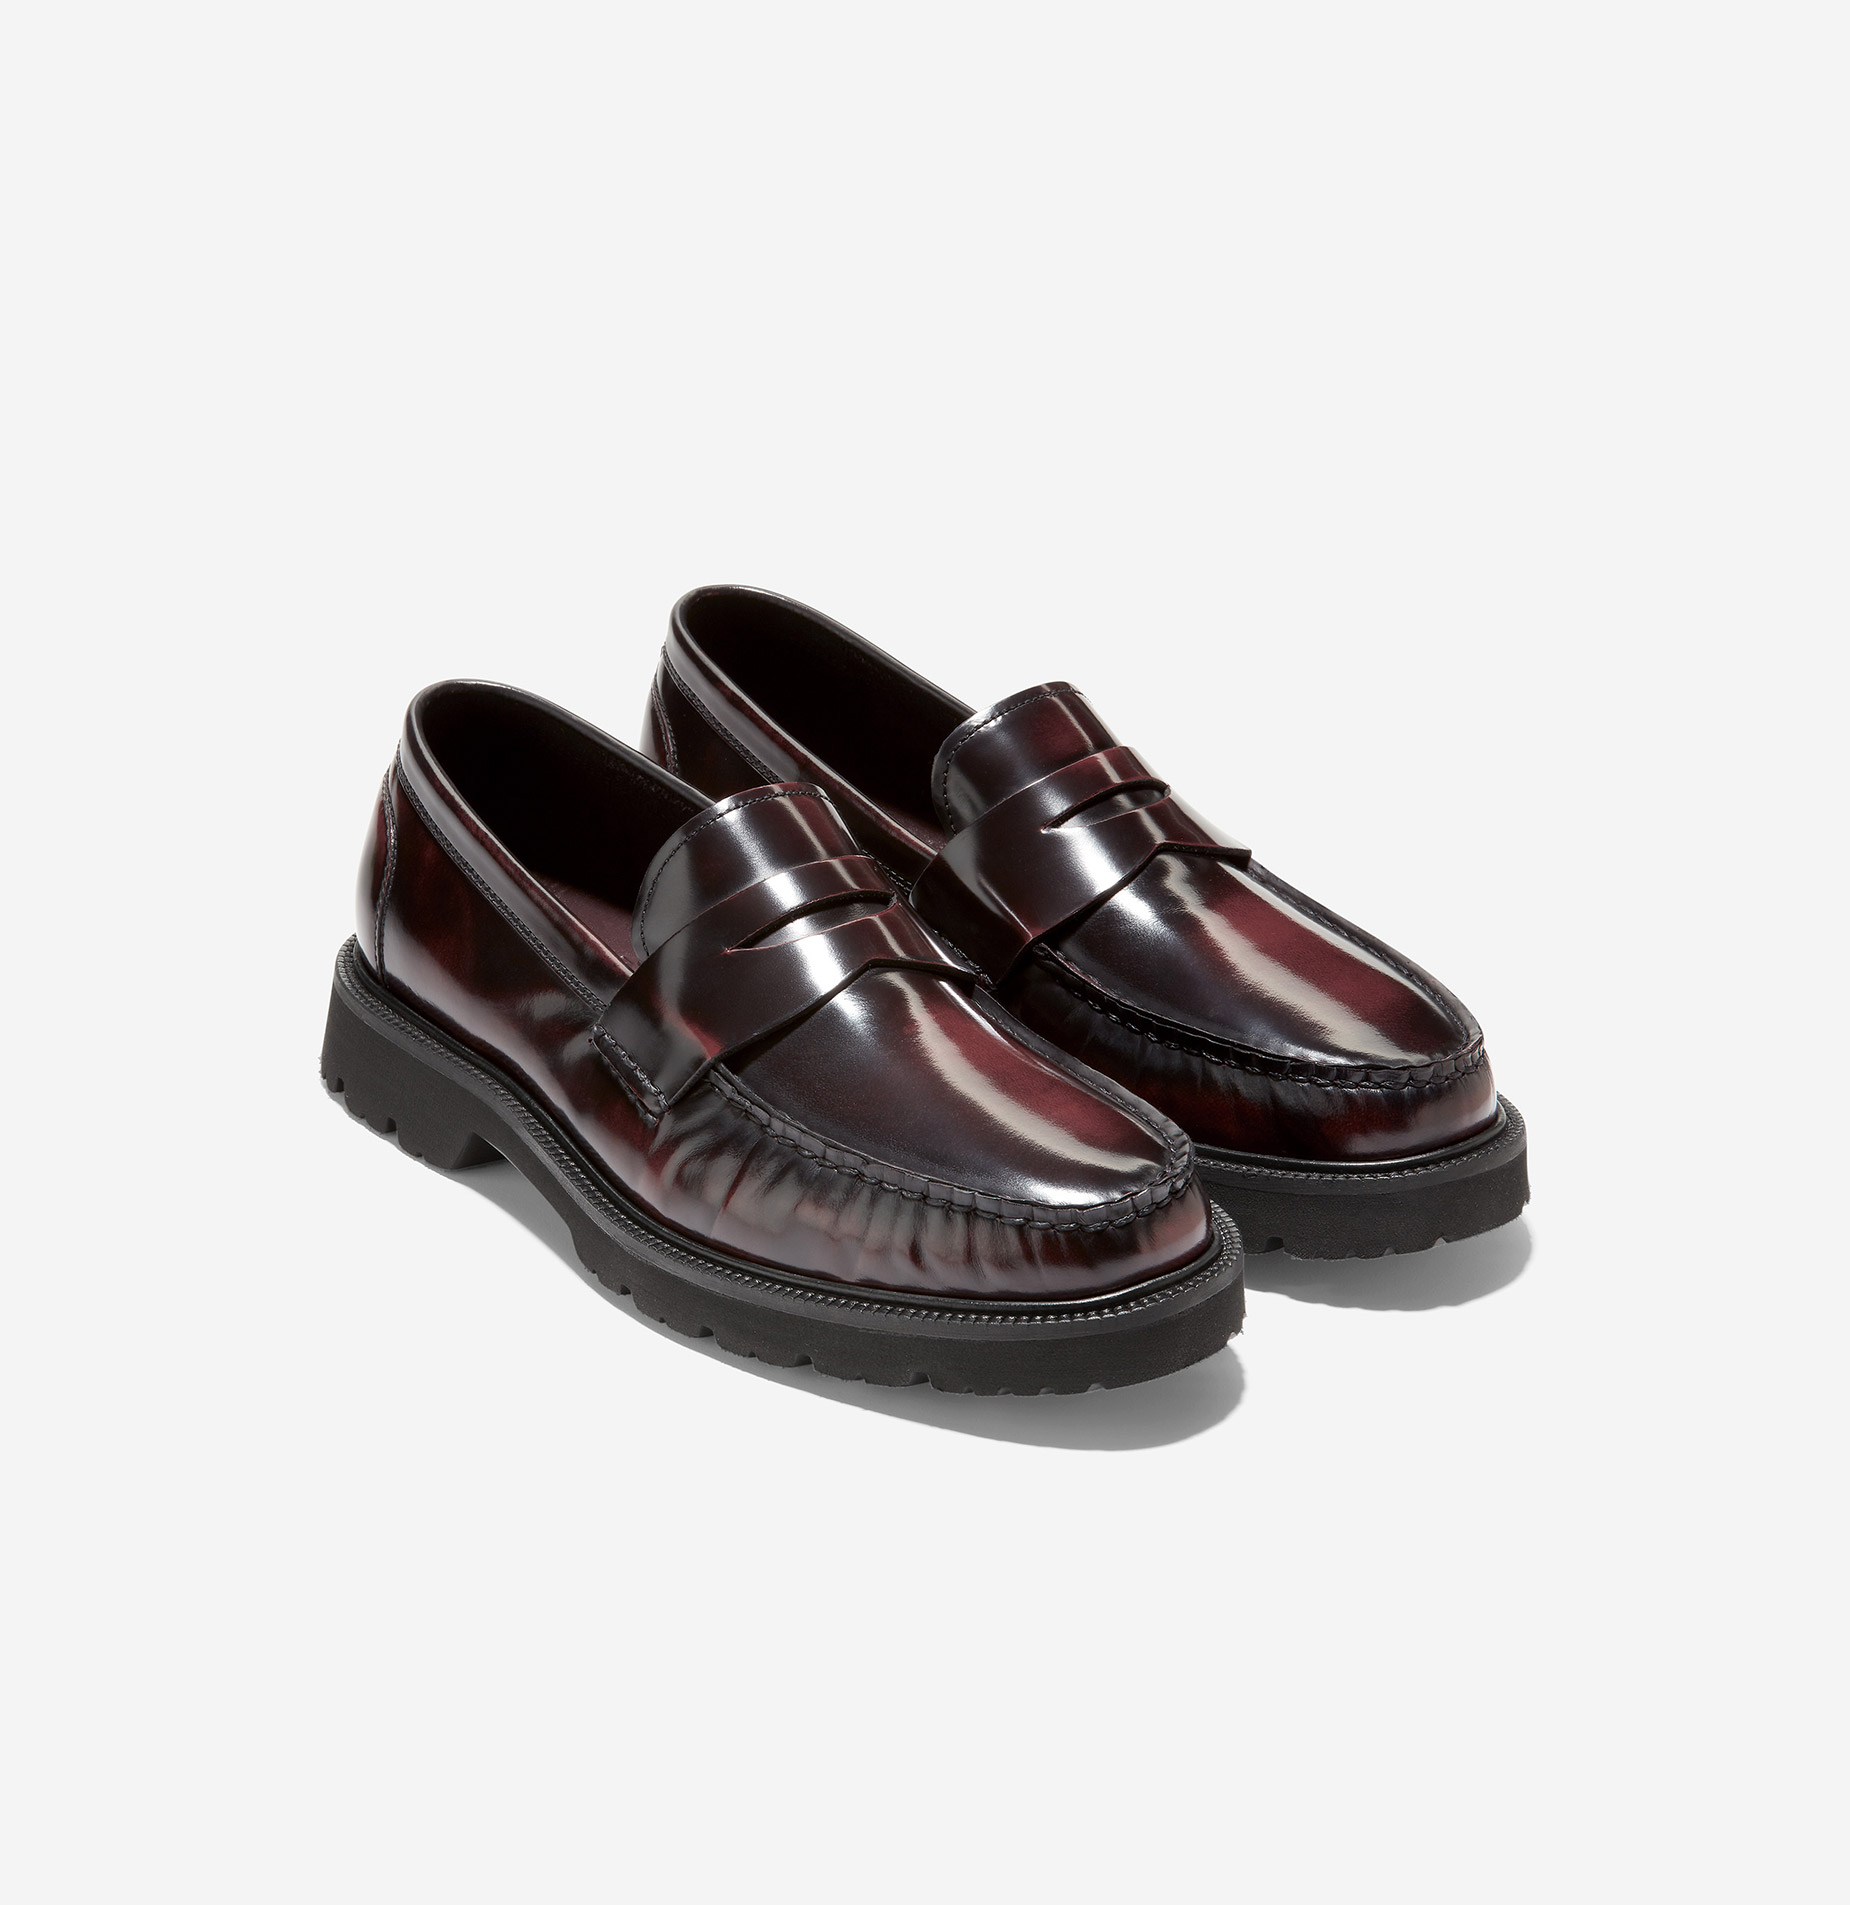 AMERICAN CLASSICS PENNY LOAFER